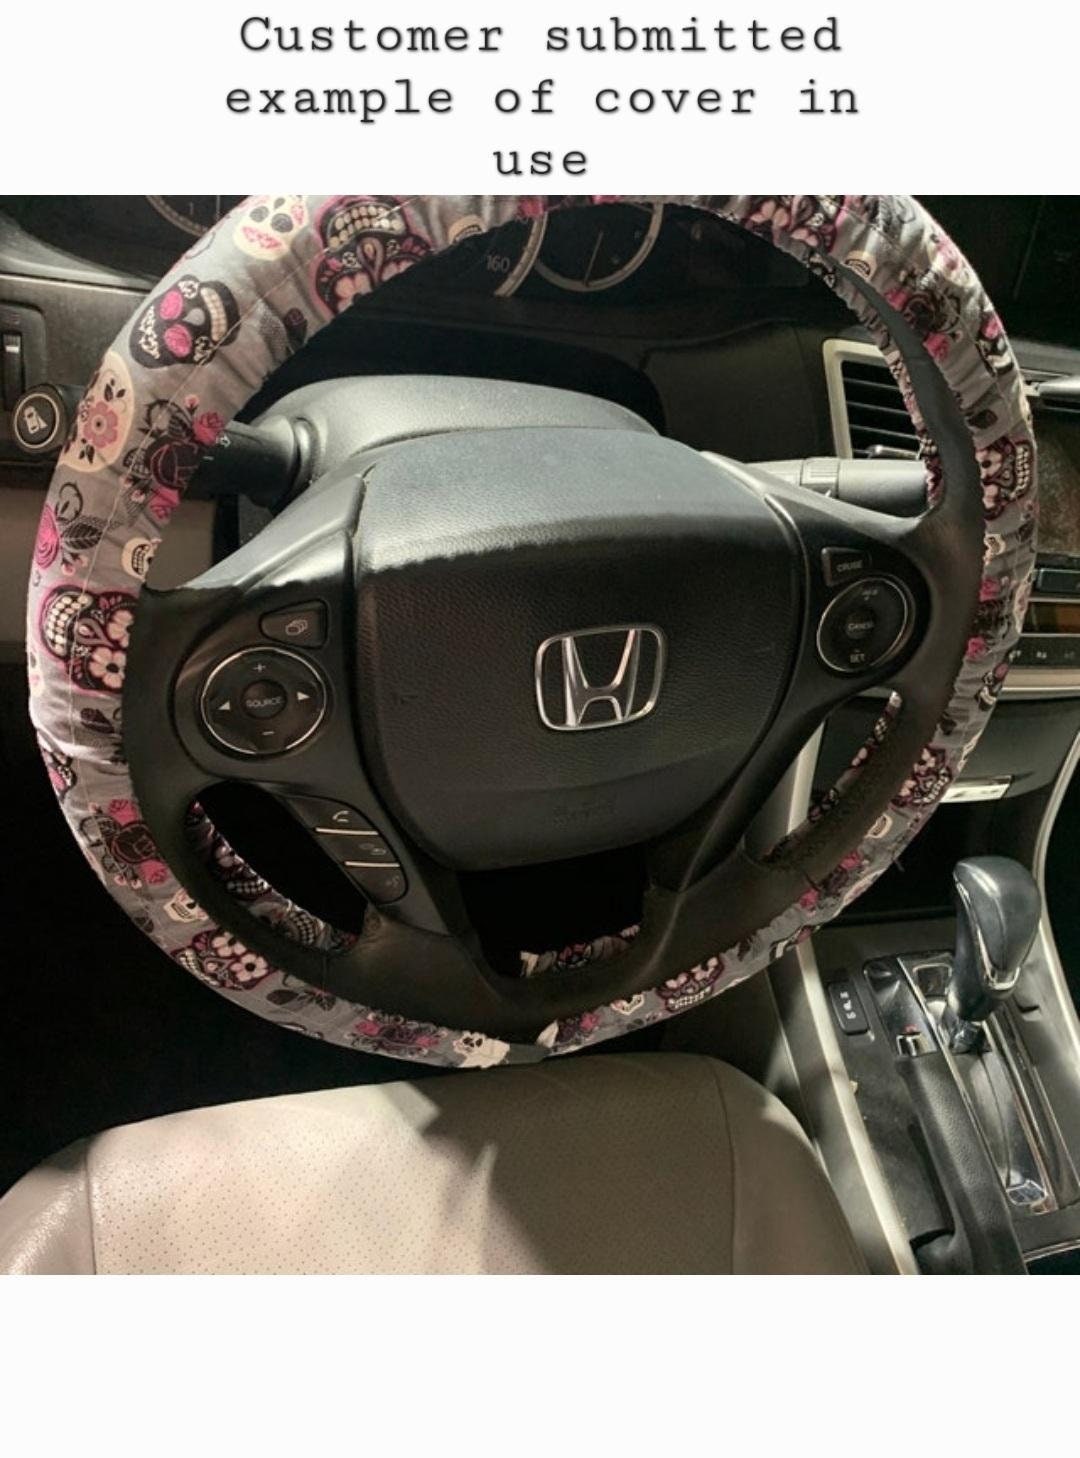 Honey Bear Steering Wheel Cover made with Licensed Disney Fabric